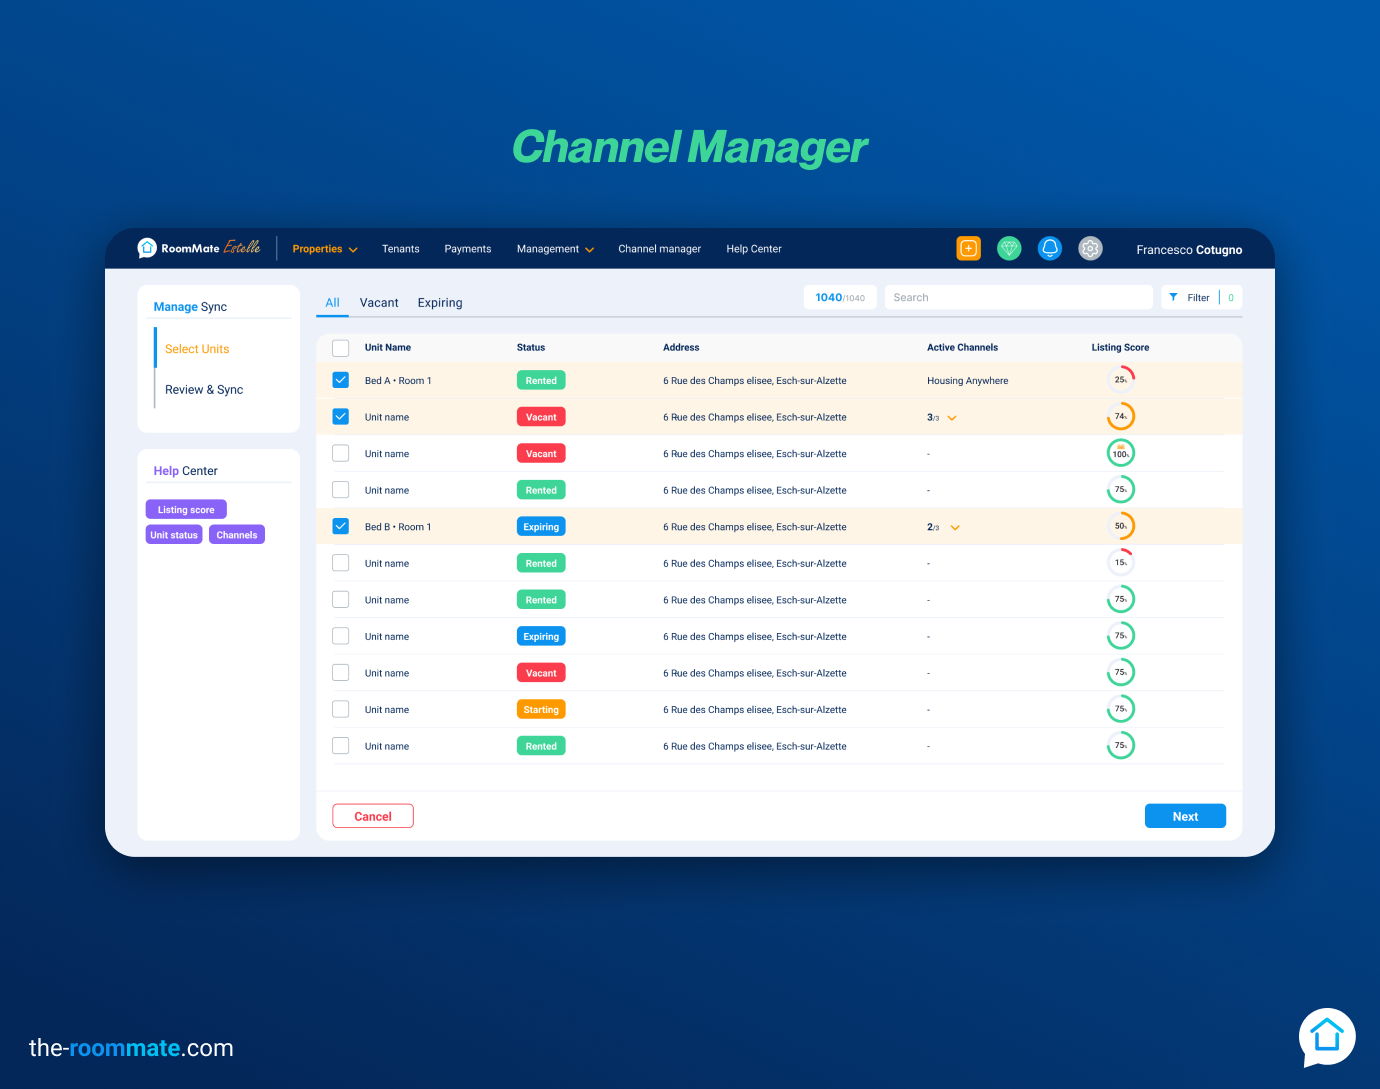 RoomMate Estelle: The Channel Manager will enable you to manage all your vacancies and is one of the tools that will help you increase your occupancy rate. Managing your availabilities has never been easier.